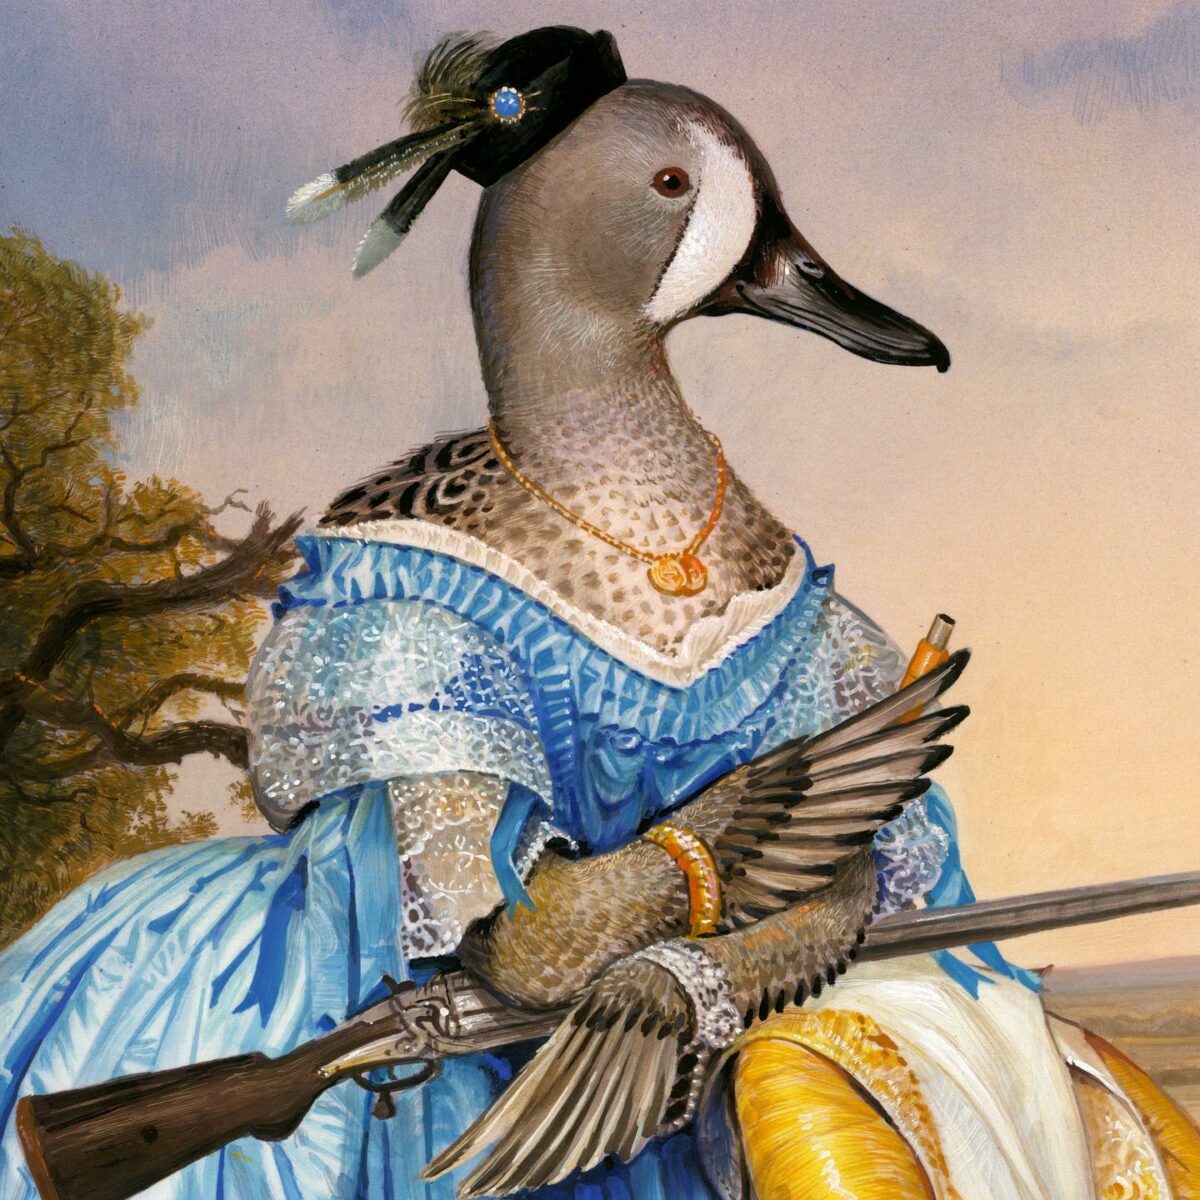 Humorous Anthropomorphized Animal Portraits In The Classical Style By Bill Mayer (8)